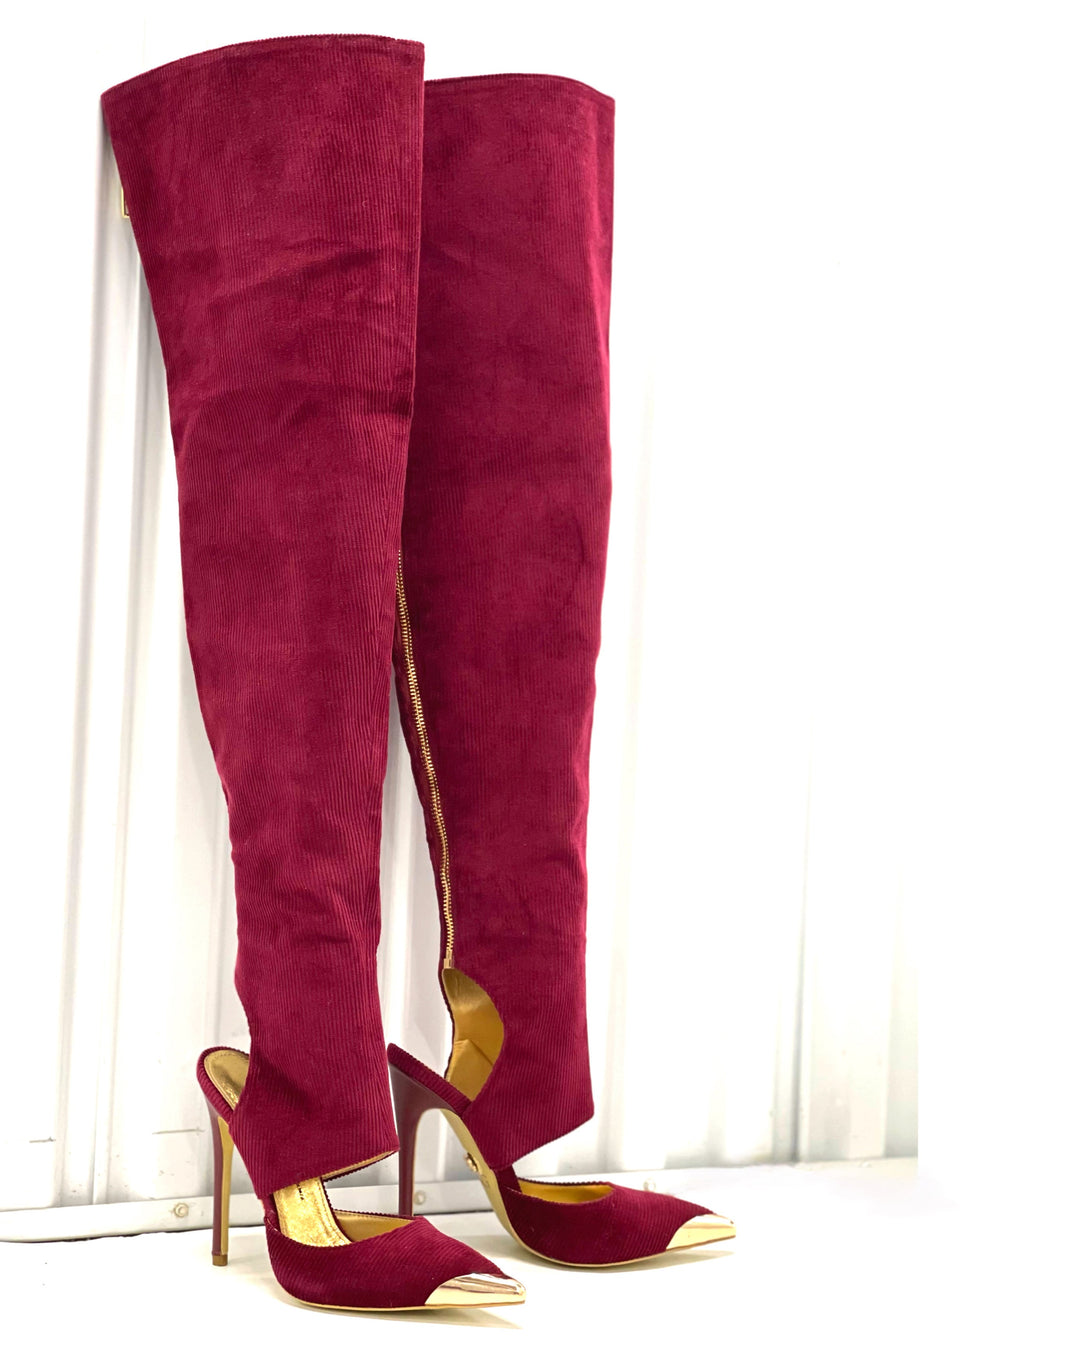 Sybgco Cold-Summer Thigh High Boots (Burgundy/Gold)